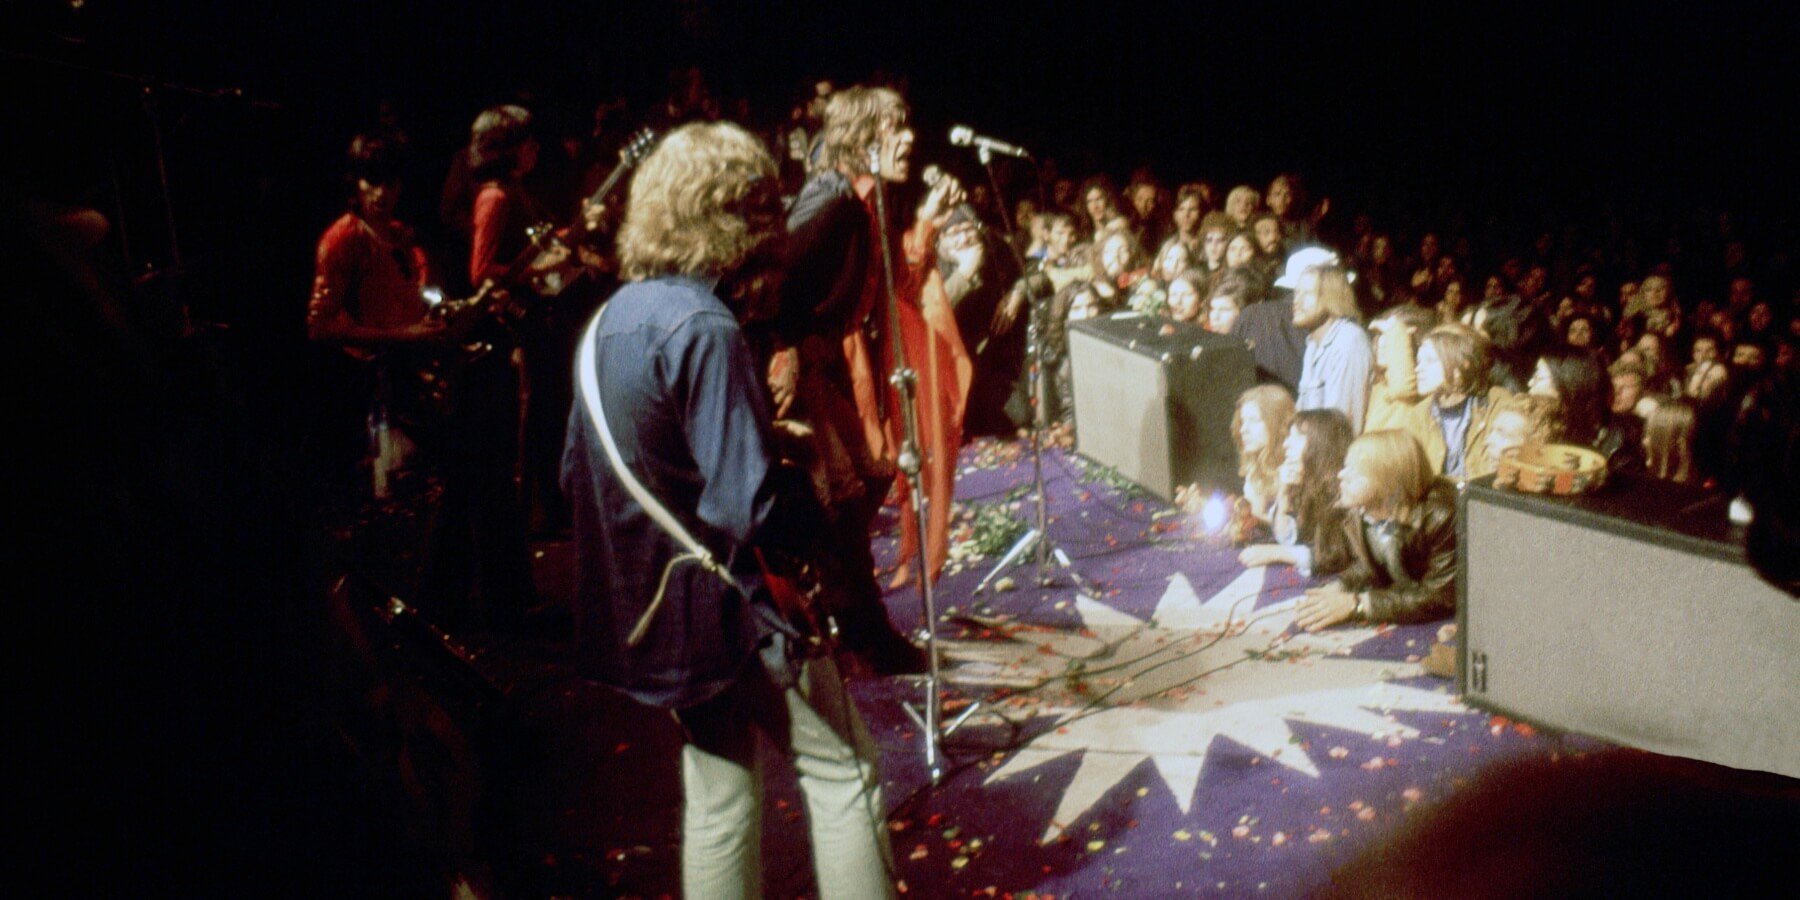 The Rolling Stones perform at Altamont in December 1969.